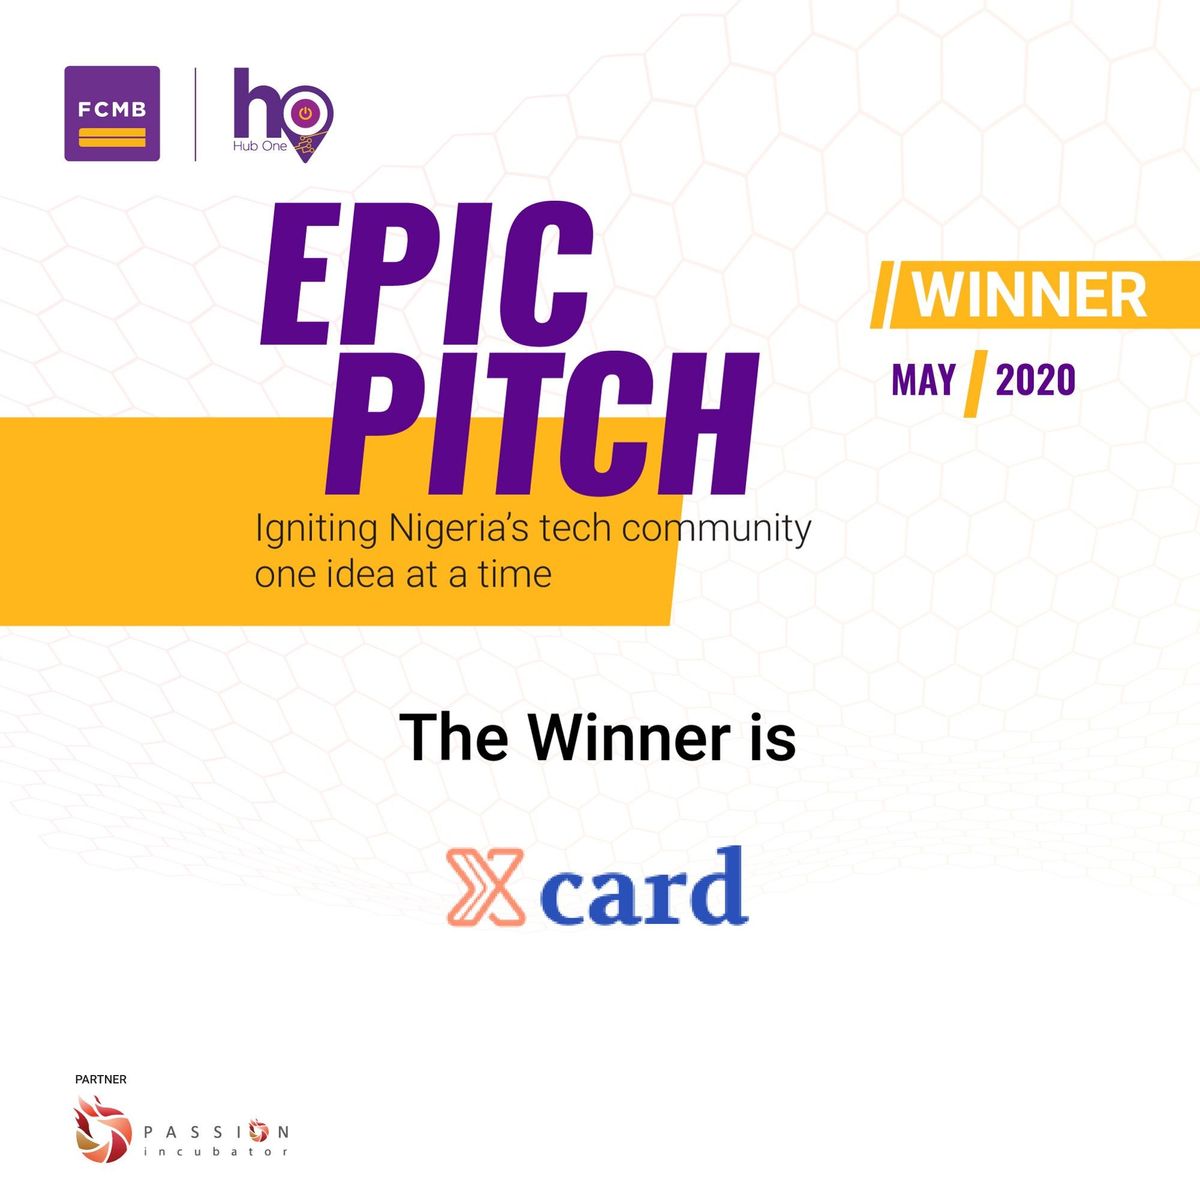 Xcard wins $300 grant and partnership with FCMB from EPIC Pitch